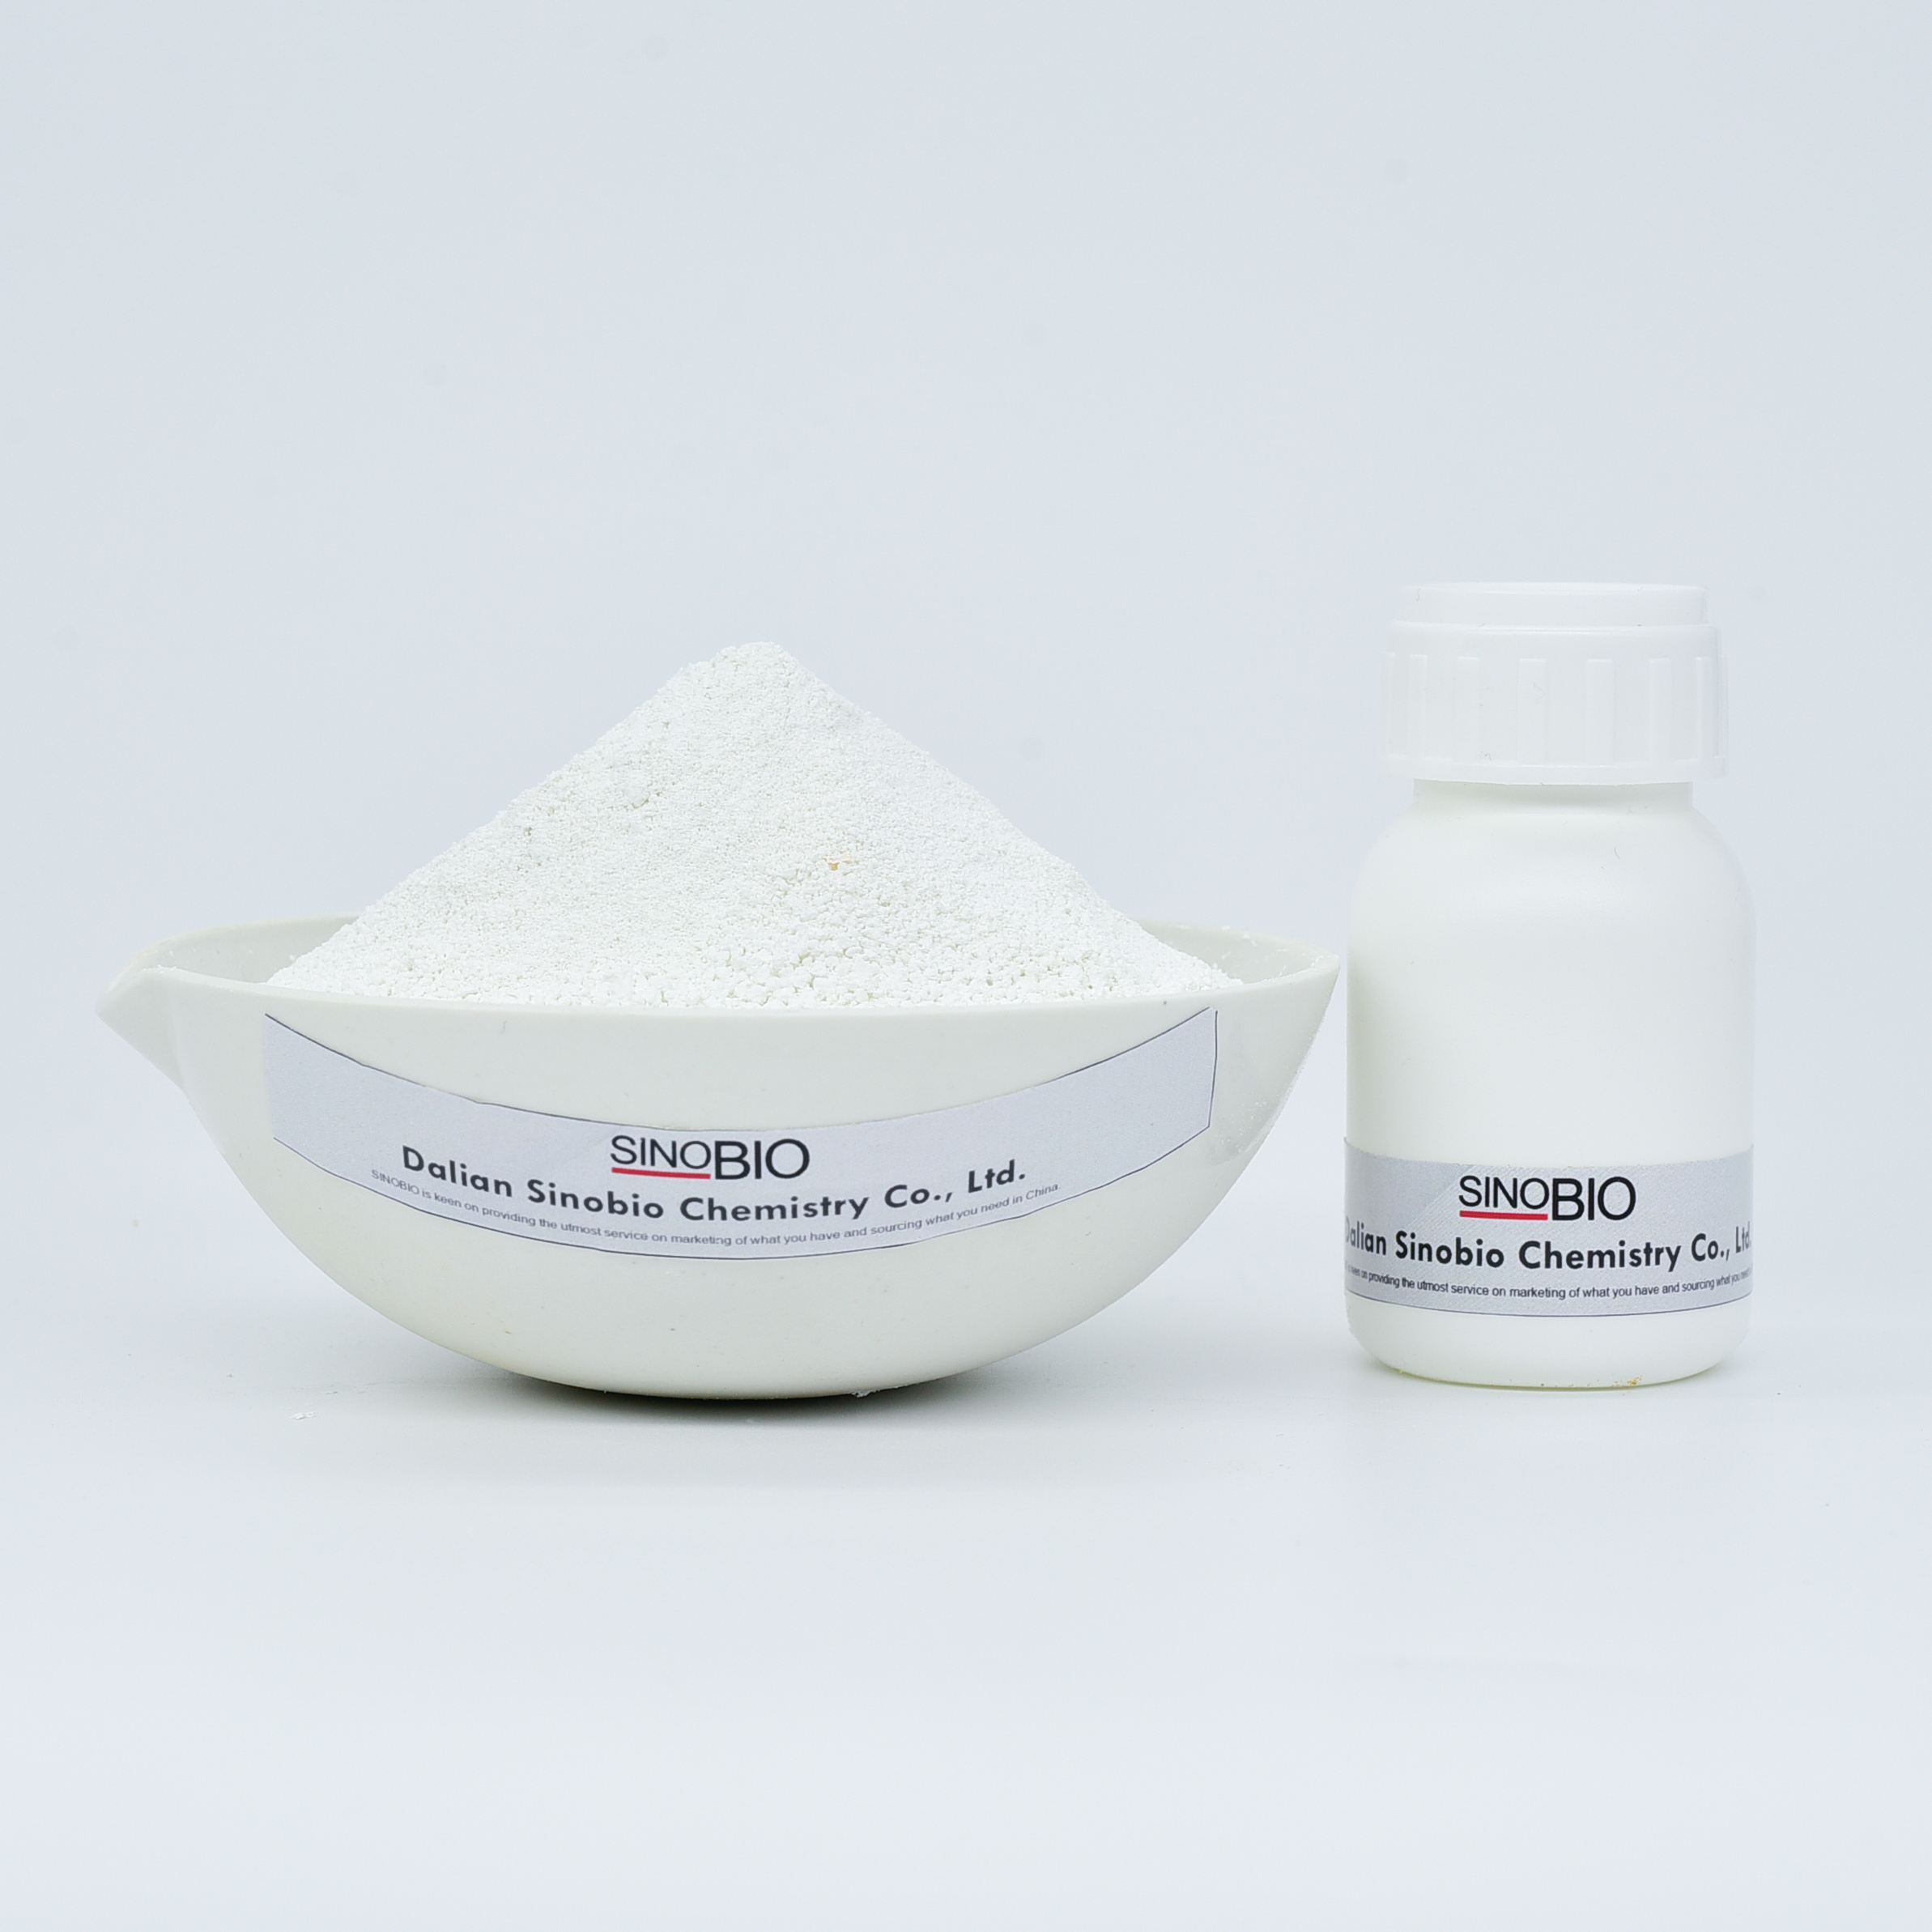 1,4-butynediol 97% cas 110-65-6 solid form in 40KG carboard drum Brightening Agent Tor Electroplating